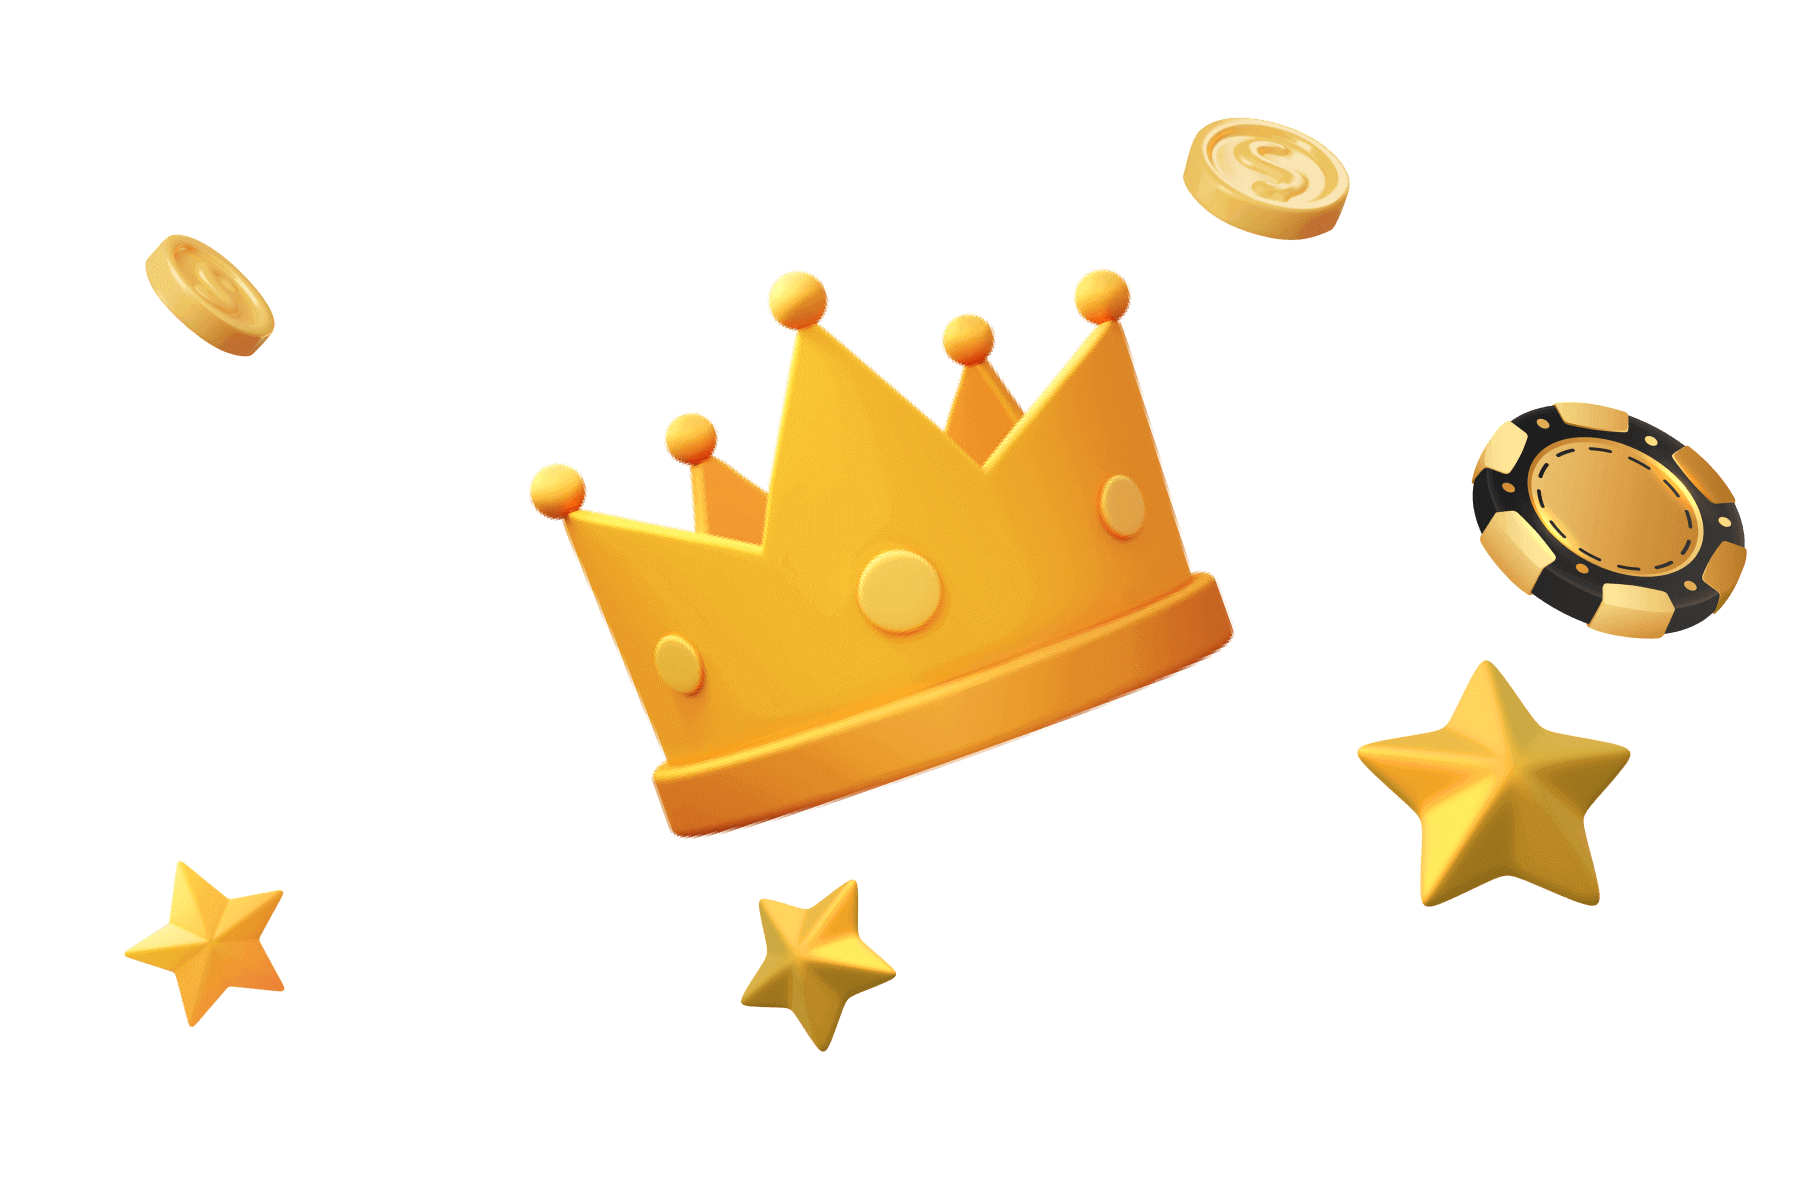 Image of a fancy crown with stars and a casino chip